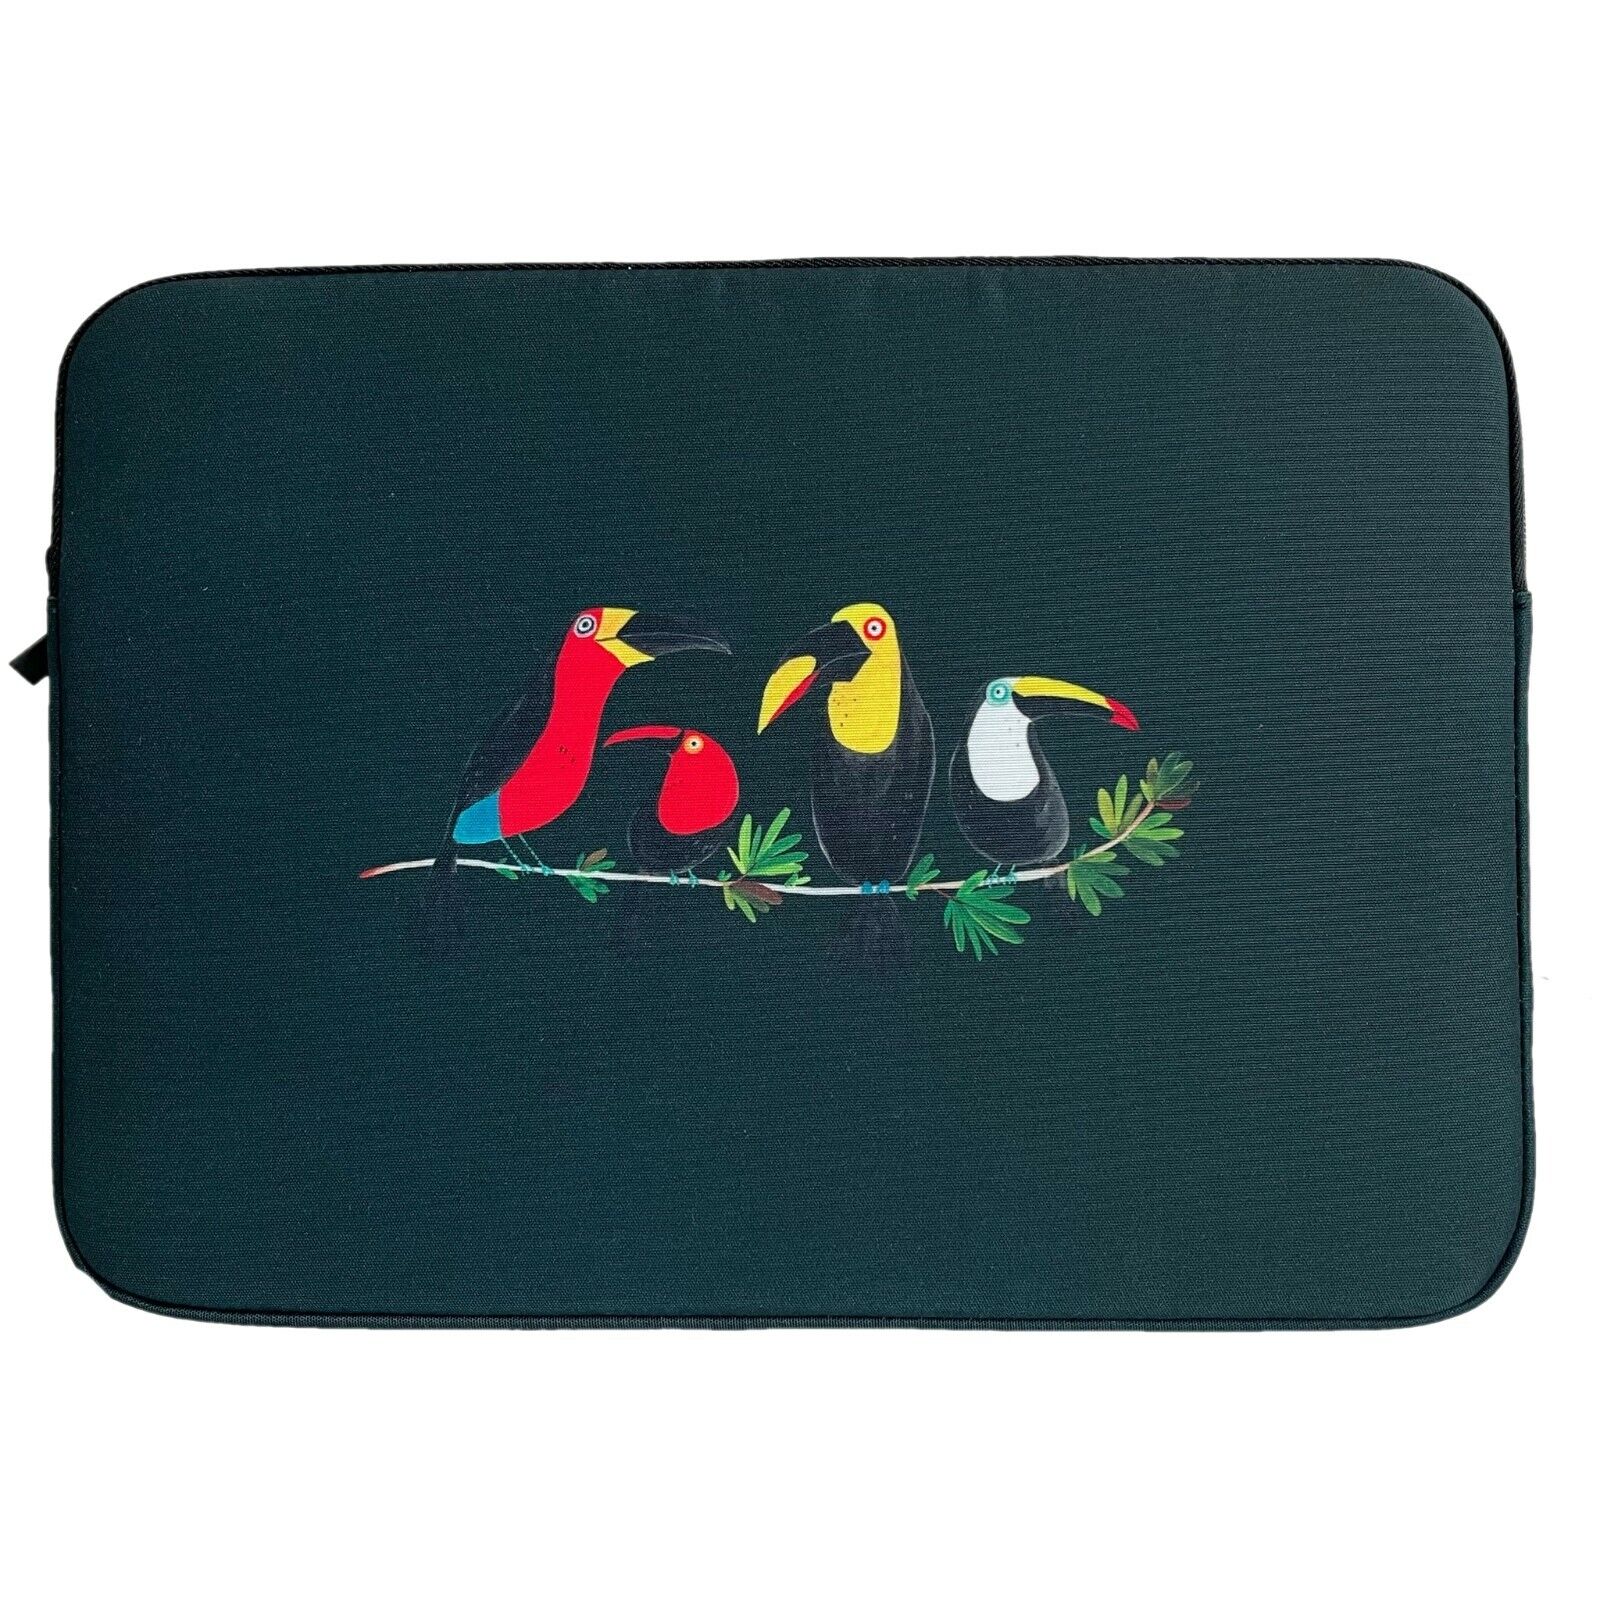 Laptop Sleeve Cover Pouch Case 13inch Macbook Lenovo Dell Acer Gorgeous Toucans 